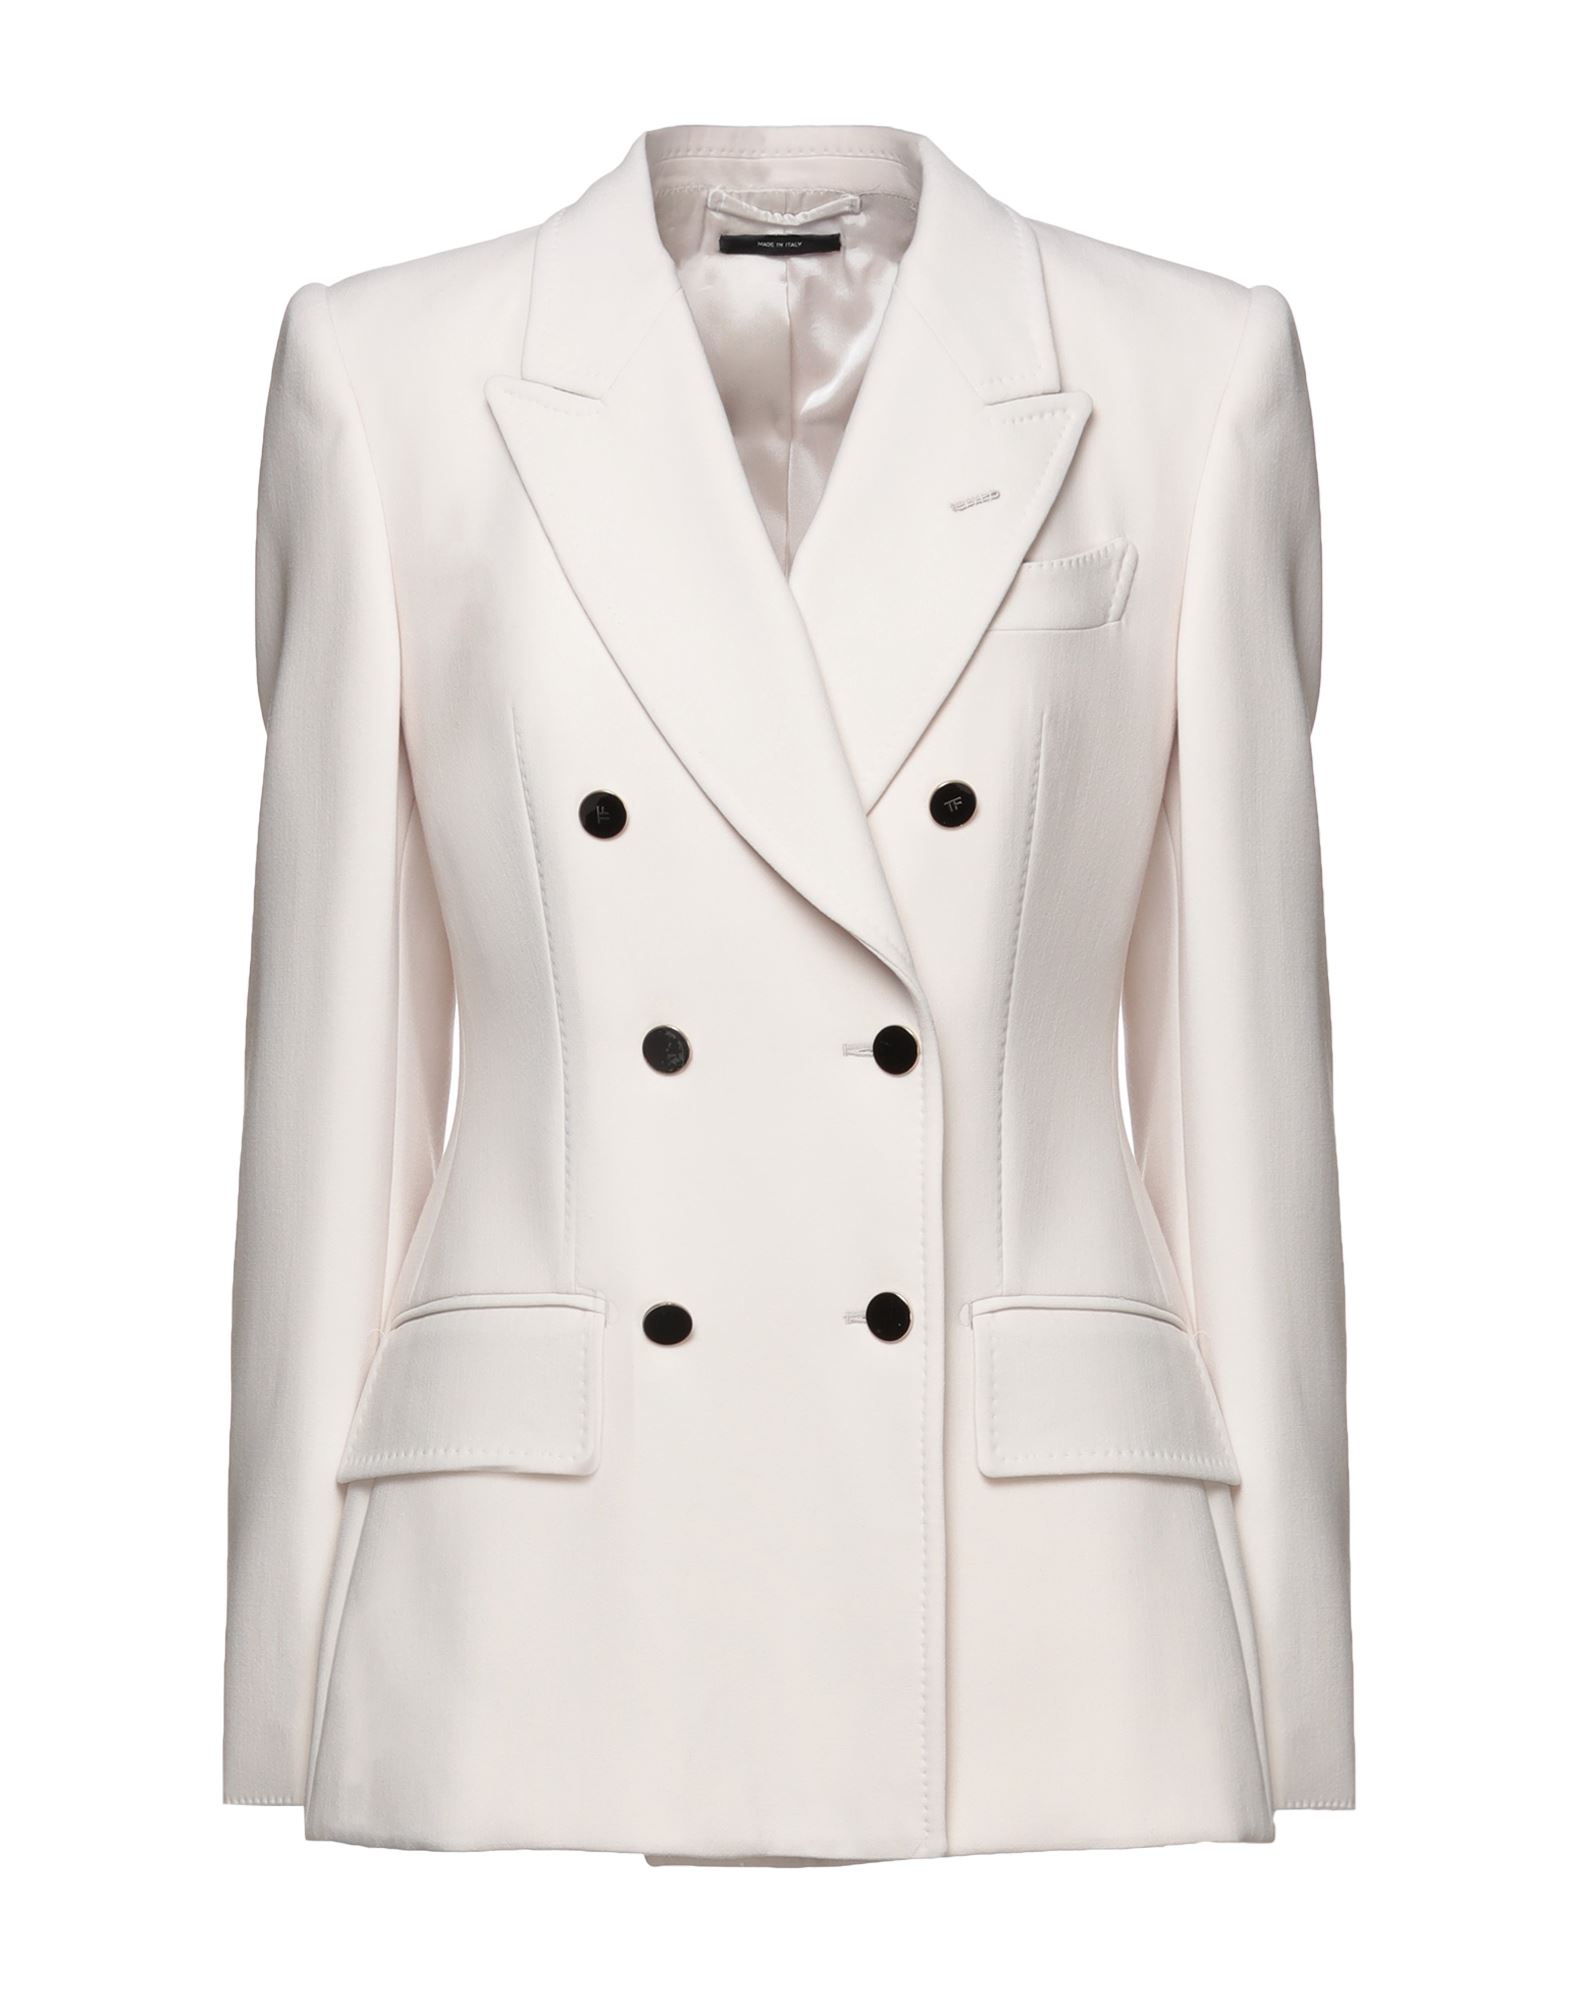 TOM FORD SUIT JACKETS,49639402WC 3